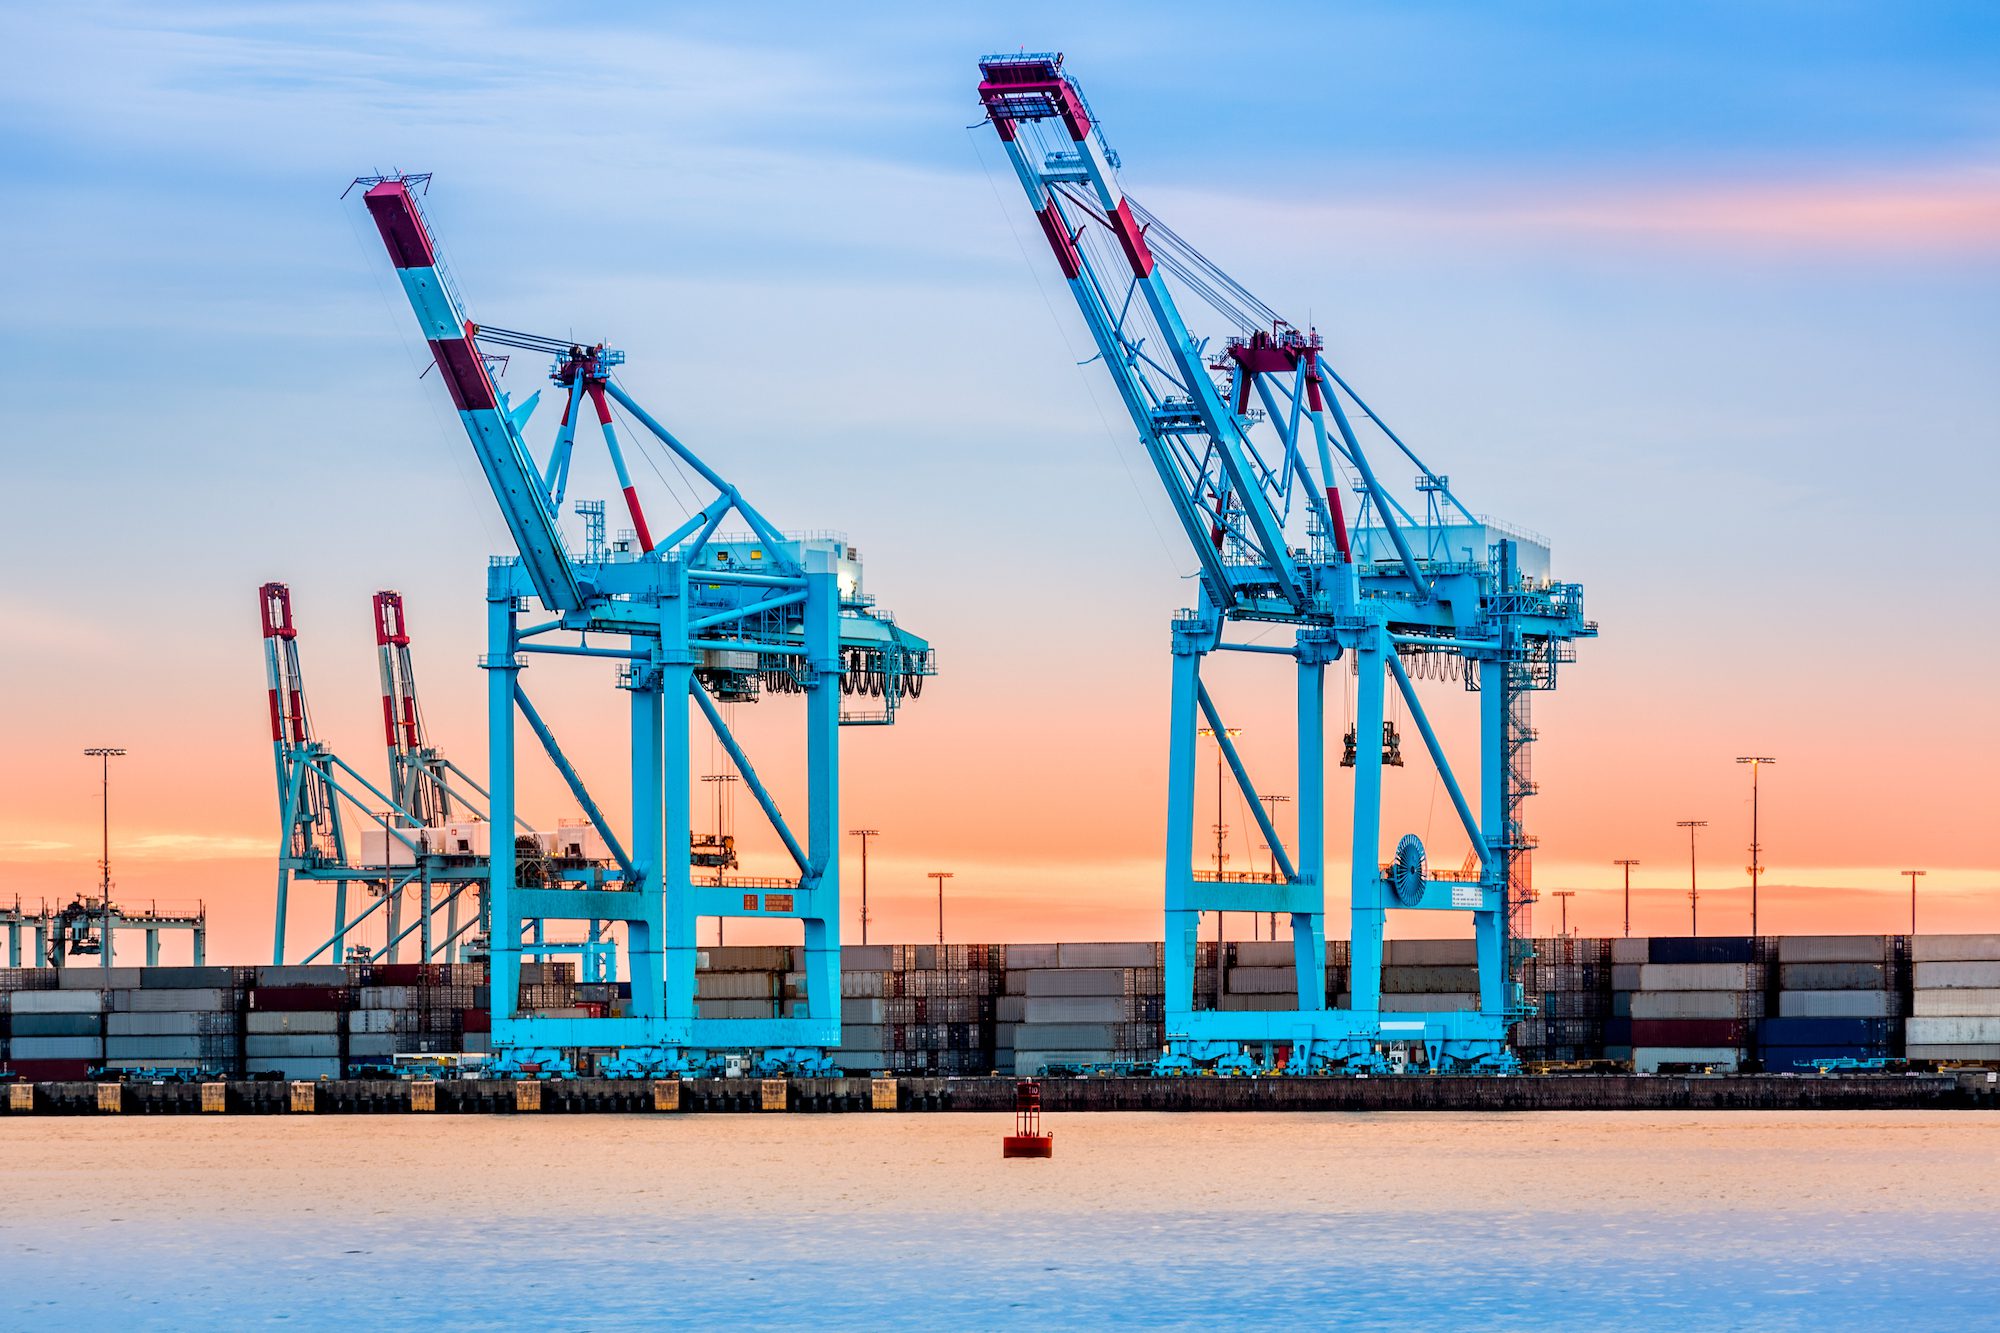 STS cranes at APM Terminals' Port Elizabeth Terminal, at the Port of New York and New Jersey. Photo: Mihai_Andritoiu/Shutterstock